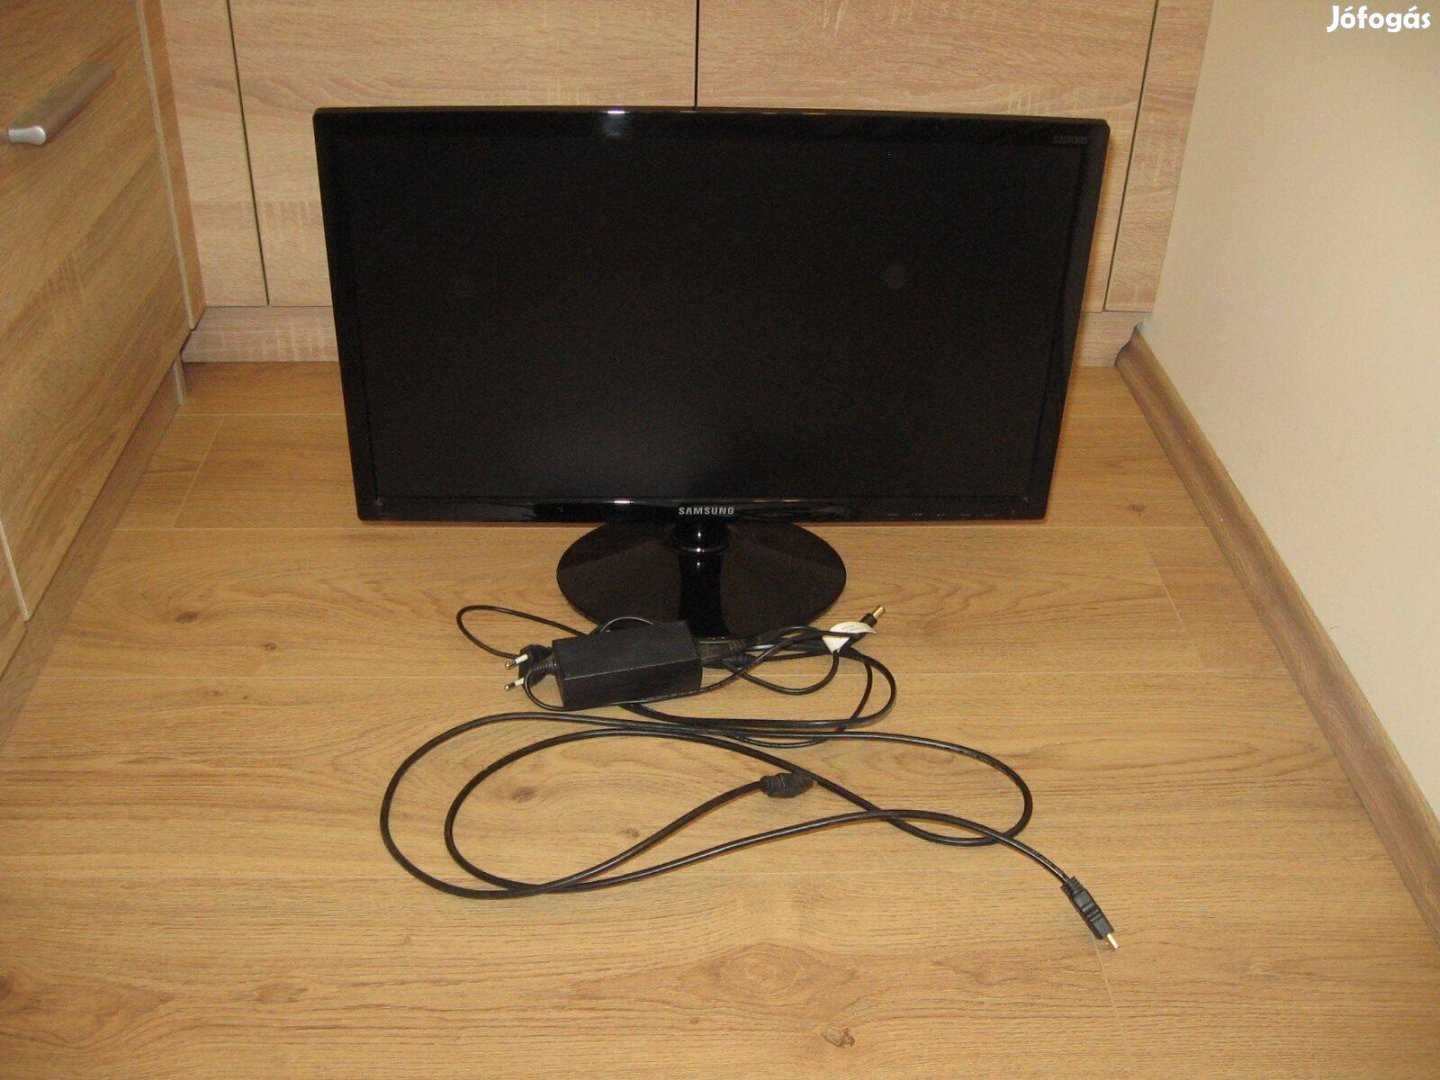 Samsung S22D300HY monitor